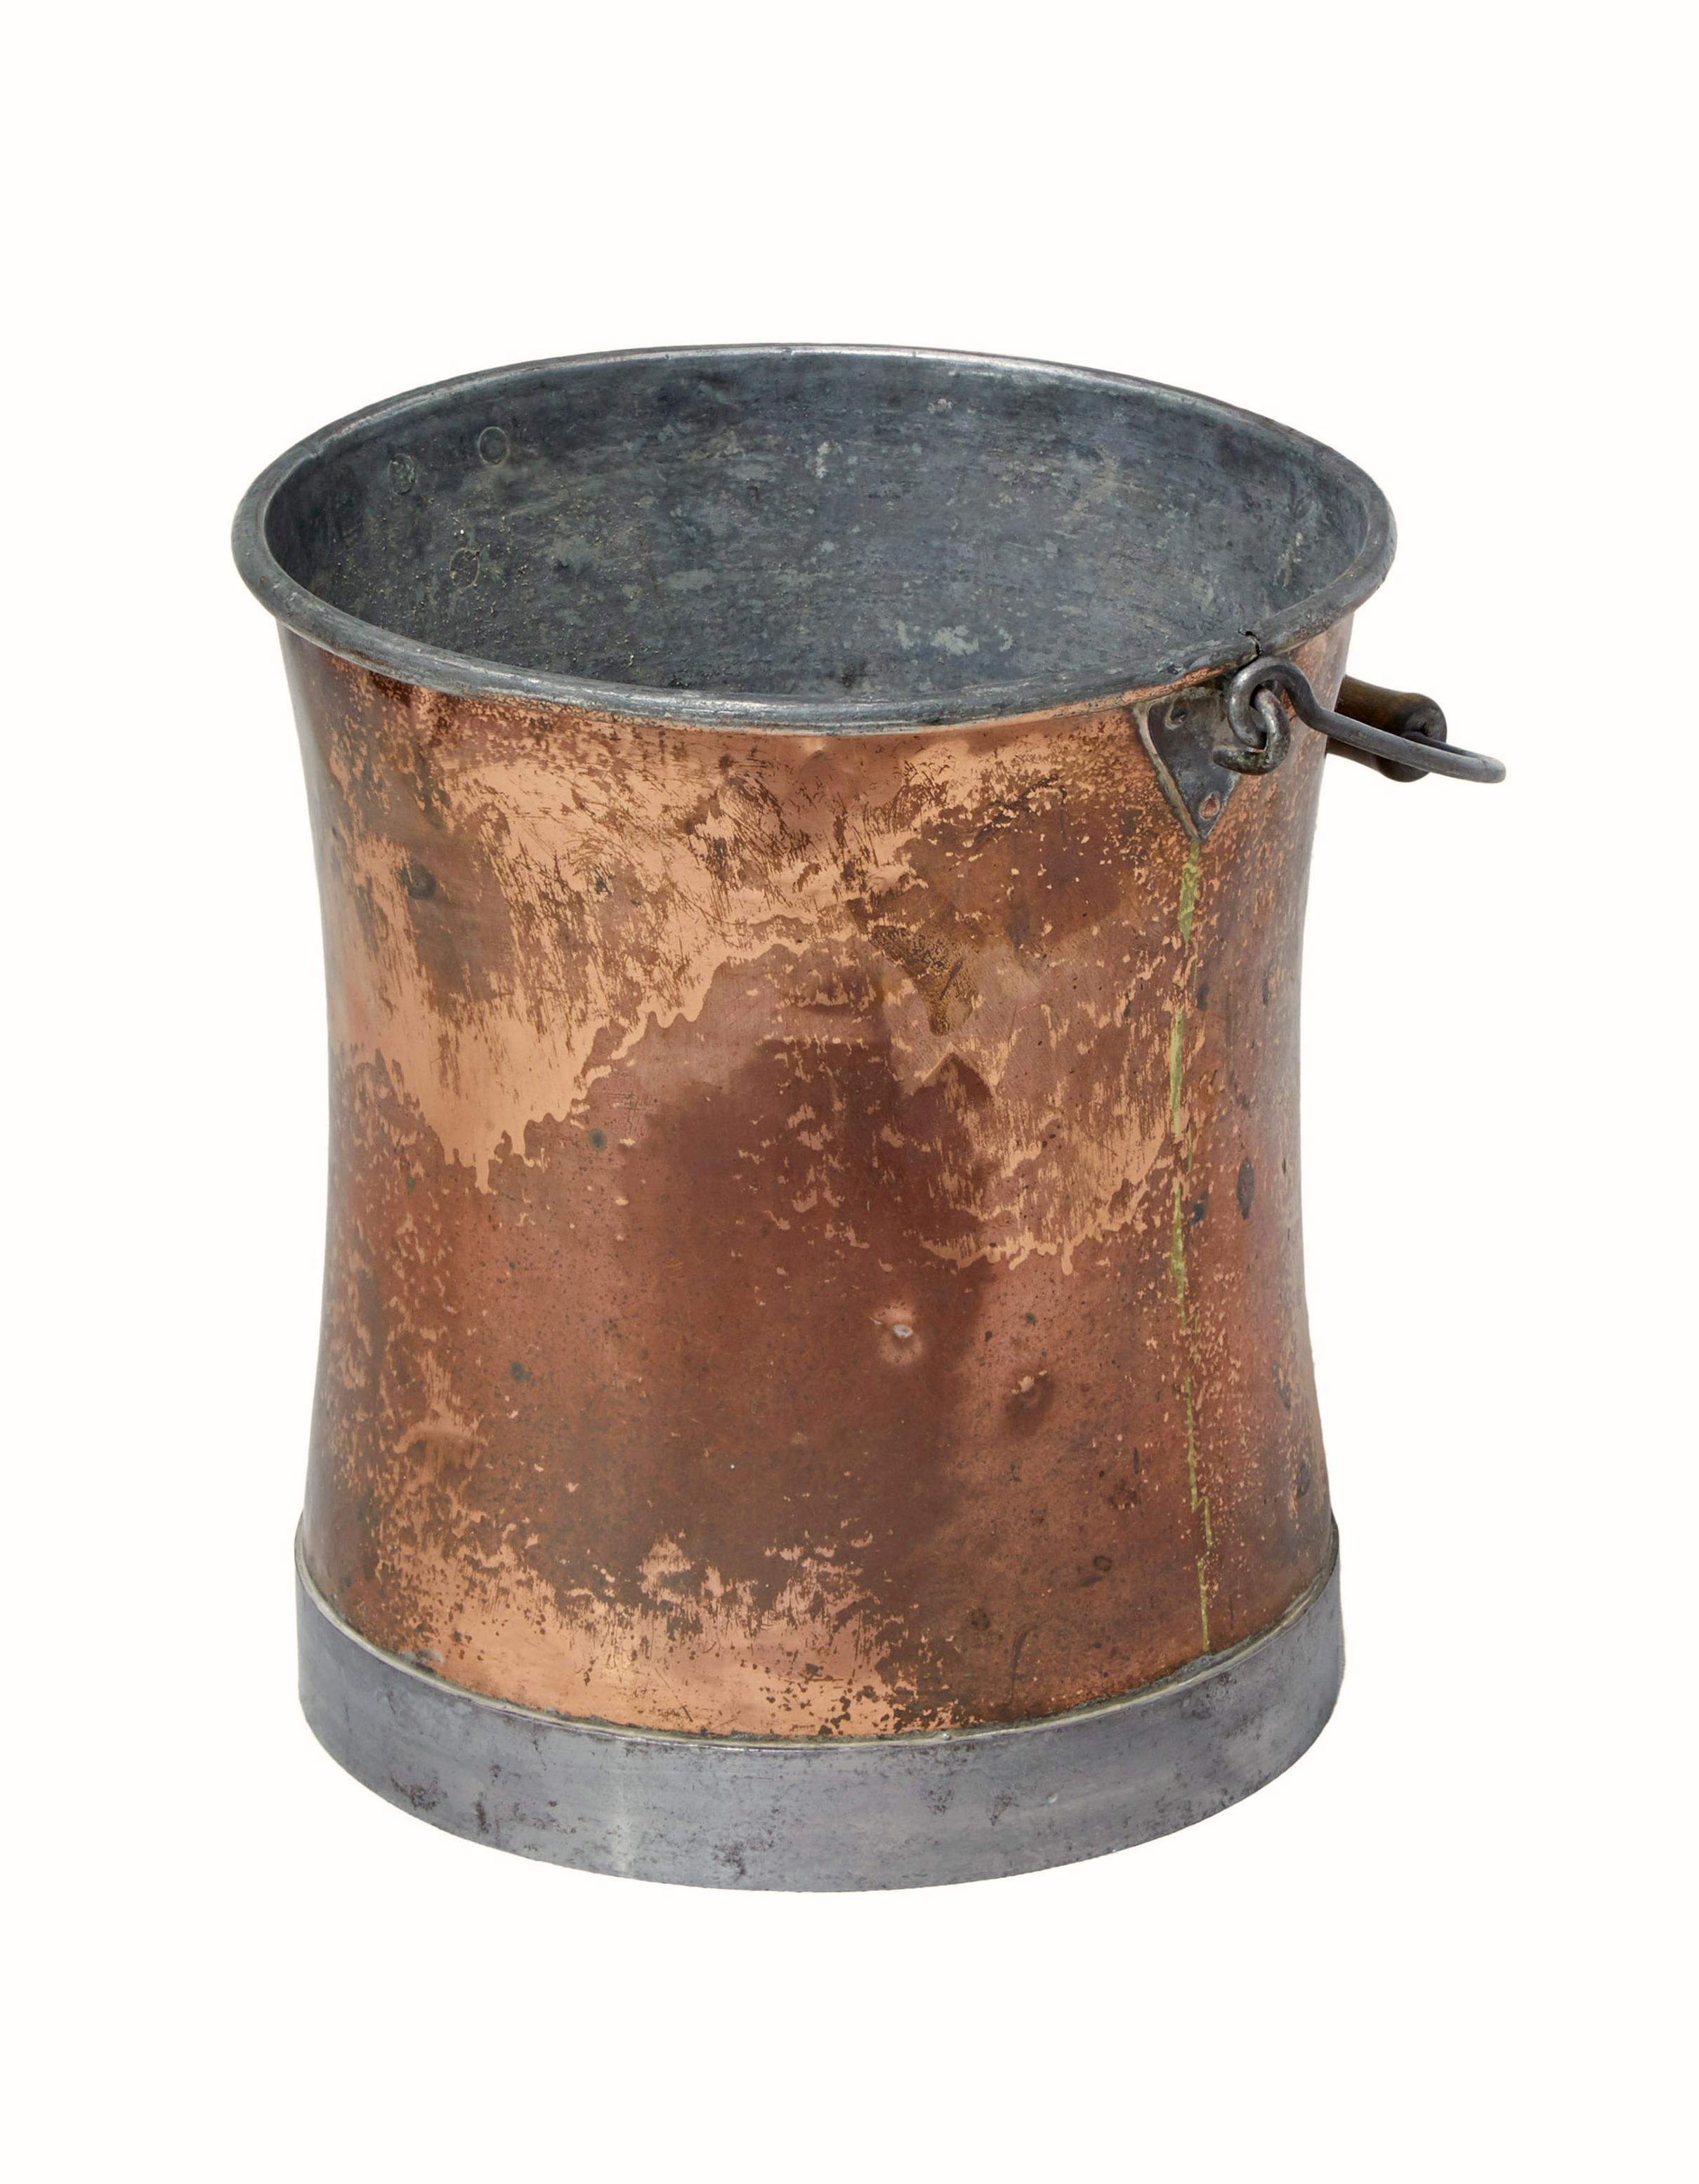 Late 19th century arts and crafts copper bucket circa 1890.

Steel and copper bucket.  Nicely shaped compared to the norm.  Complete with handle and original wooden grip.

Ideal use for today as a waste paper basket or kindling bin.

Expected